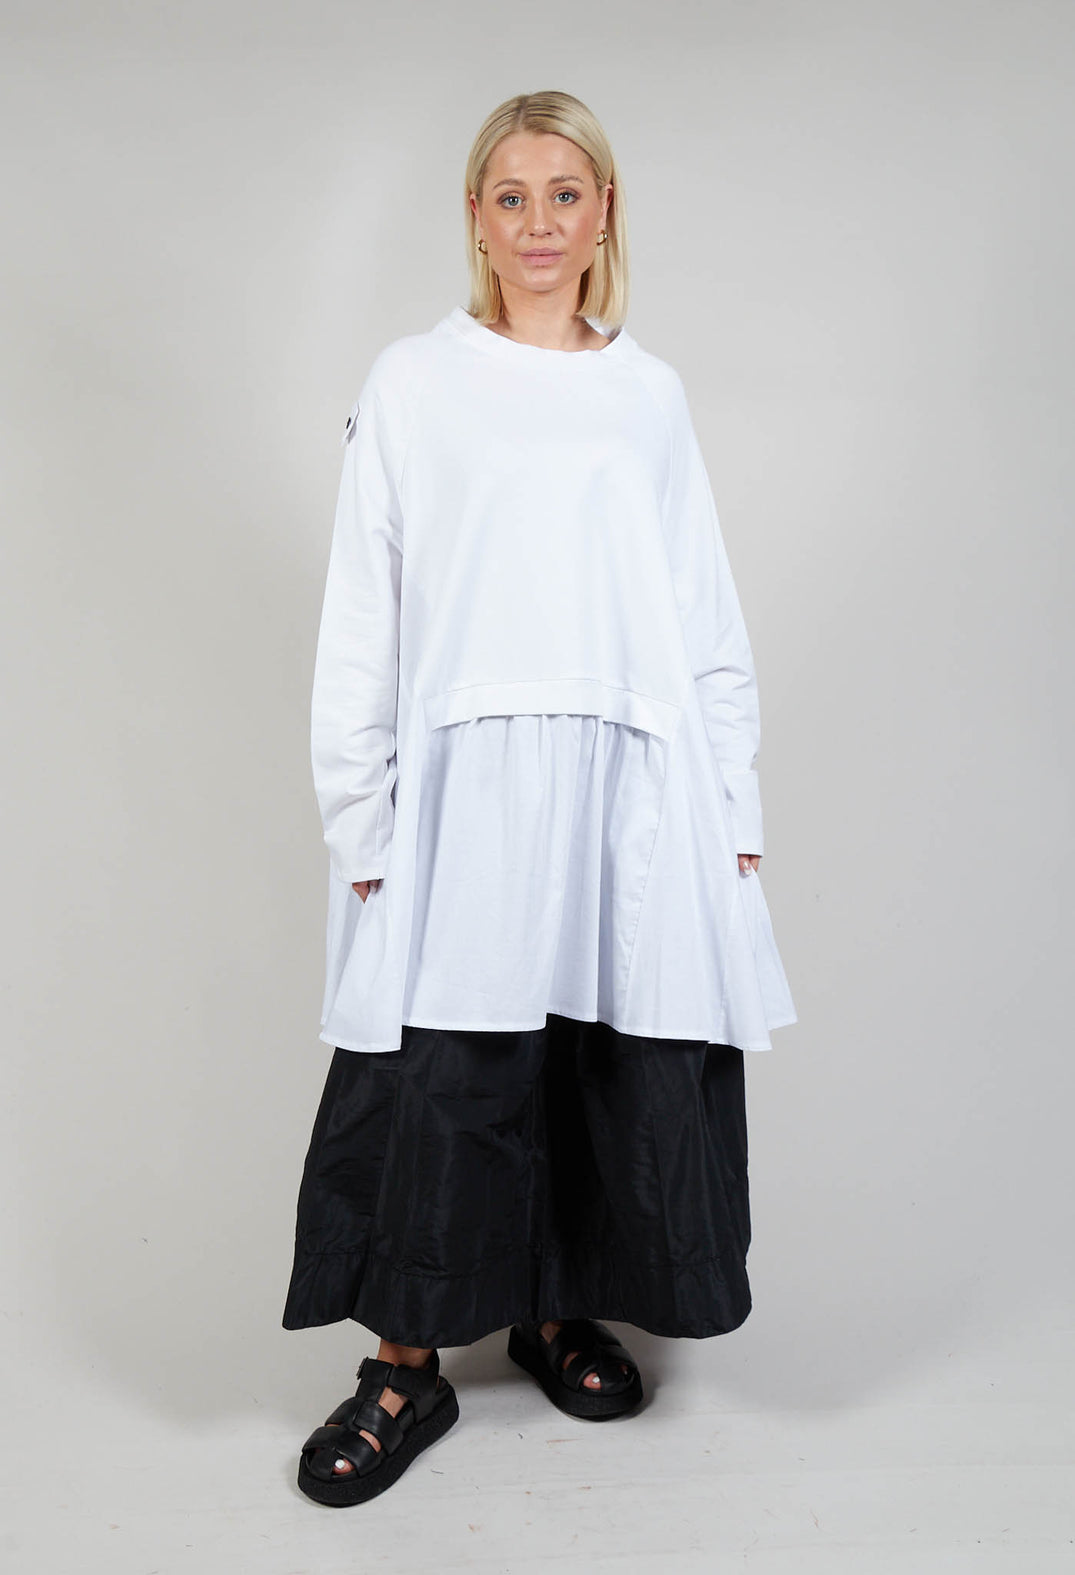 Pullover Style Jersey Tunic in White